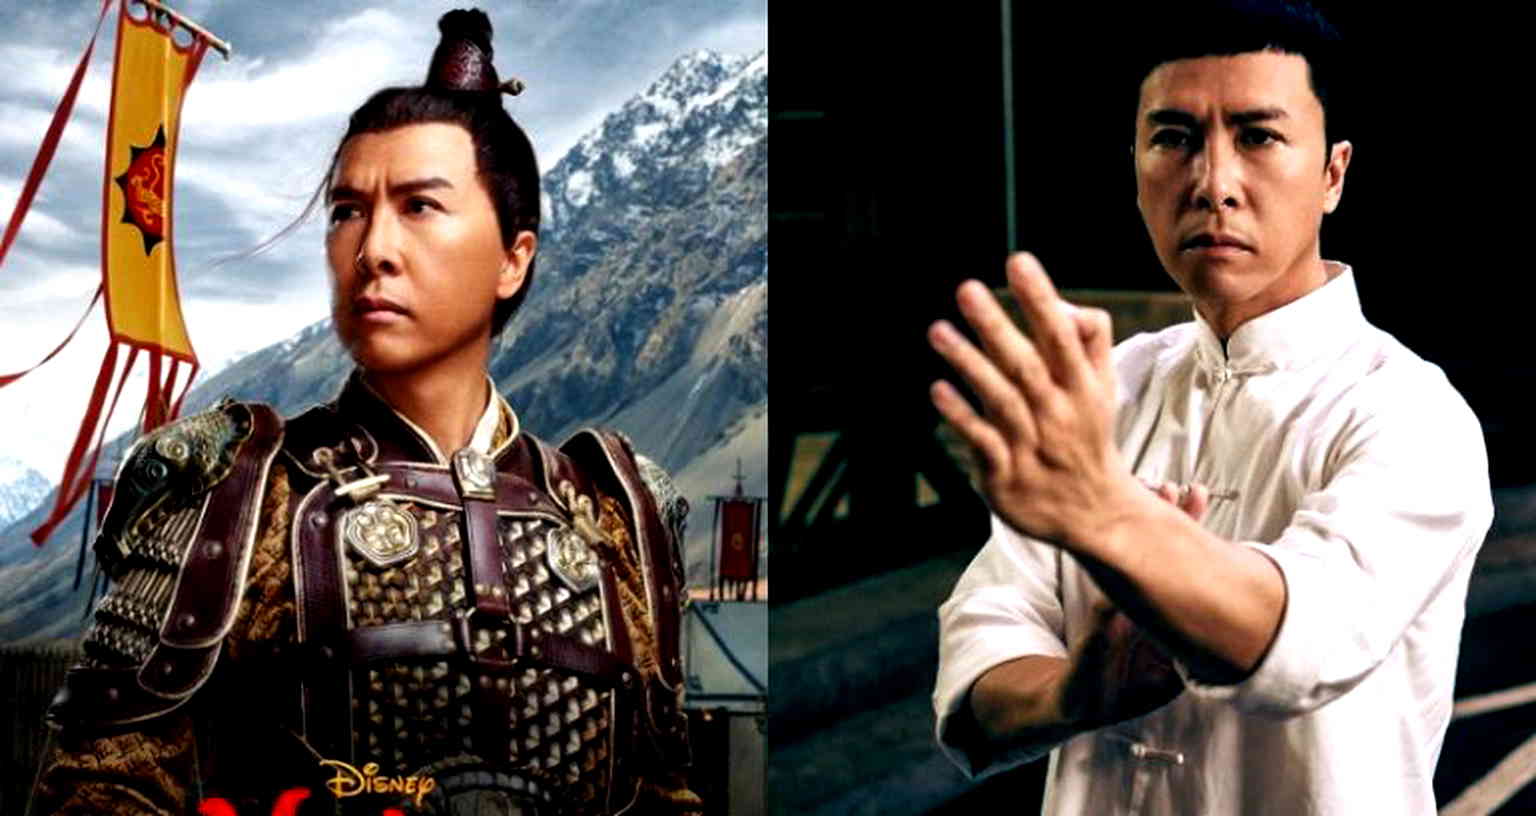 ‘Mulan’ Director’s Jaw Dropped the First Time She Saw Donnie Yen Use a Sword